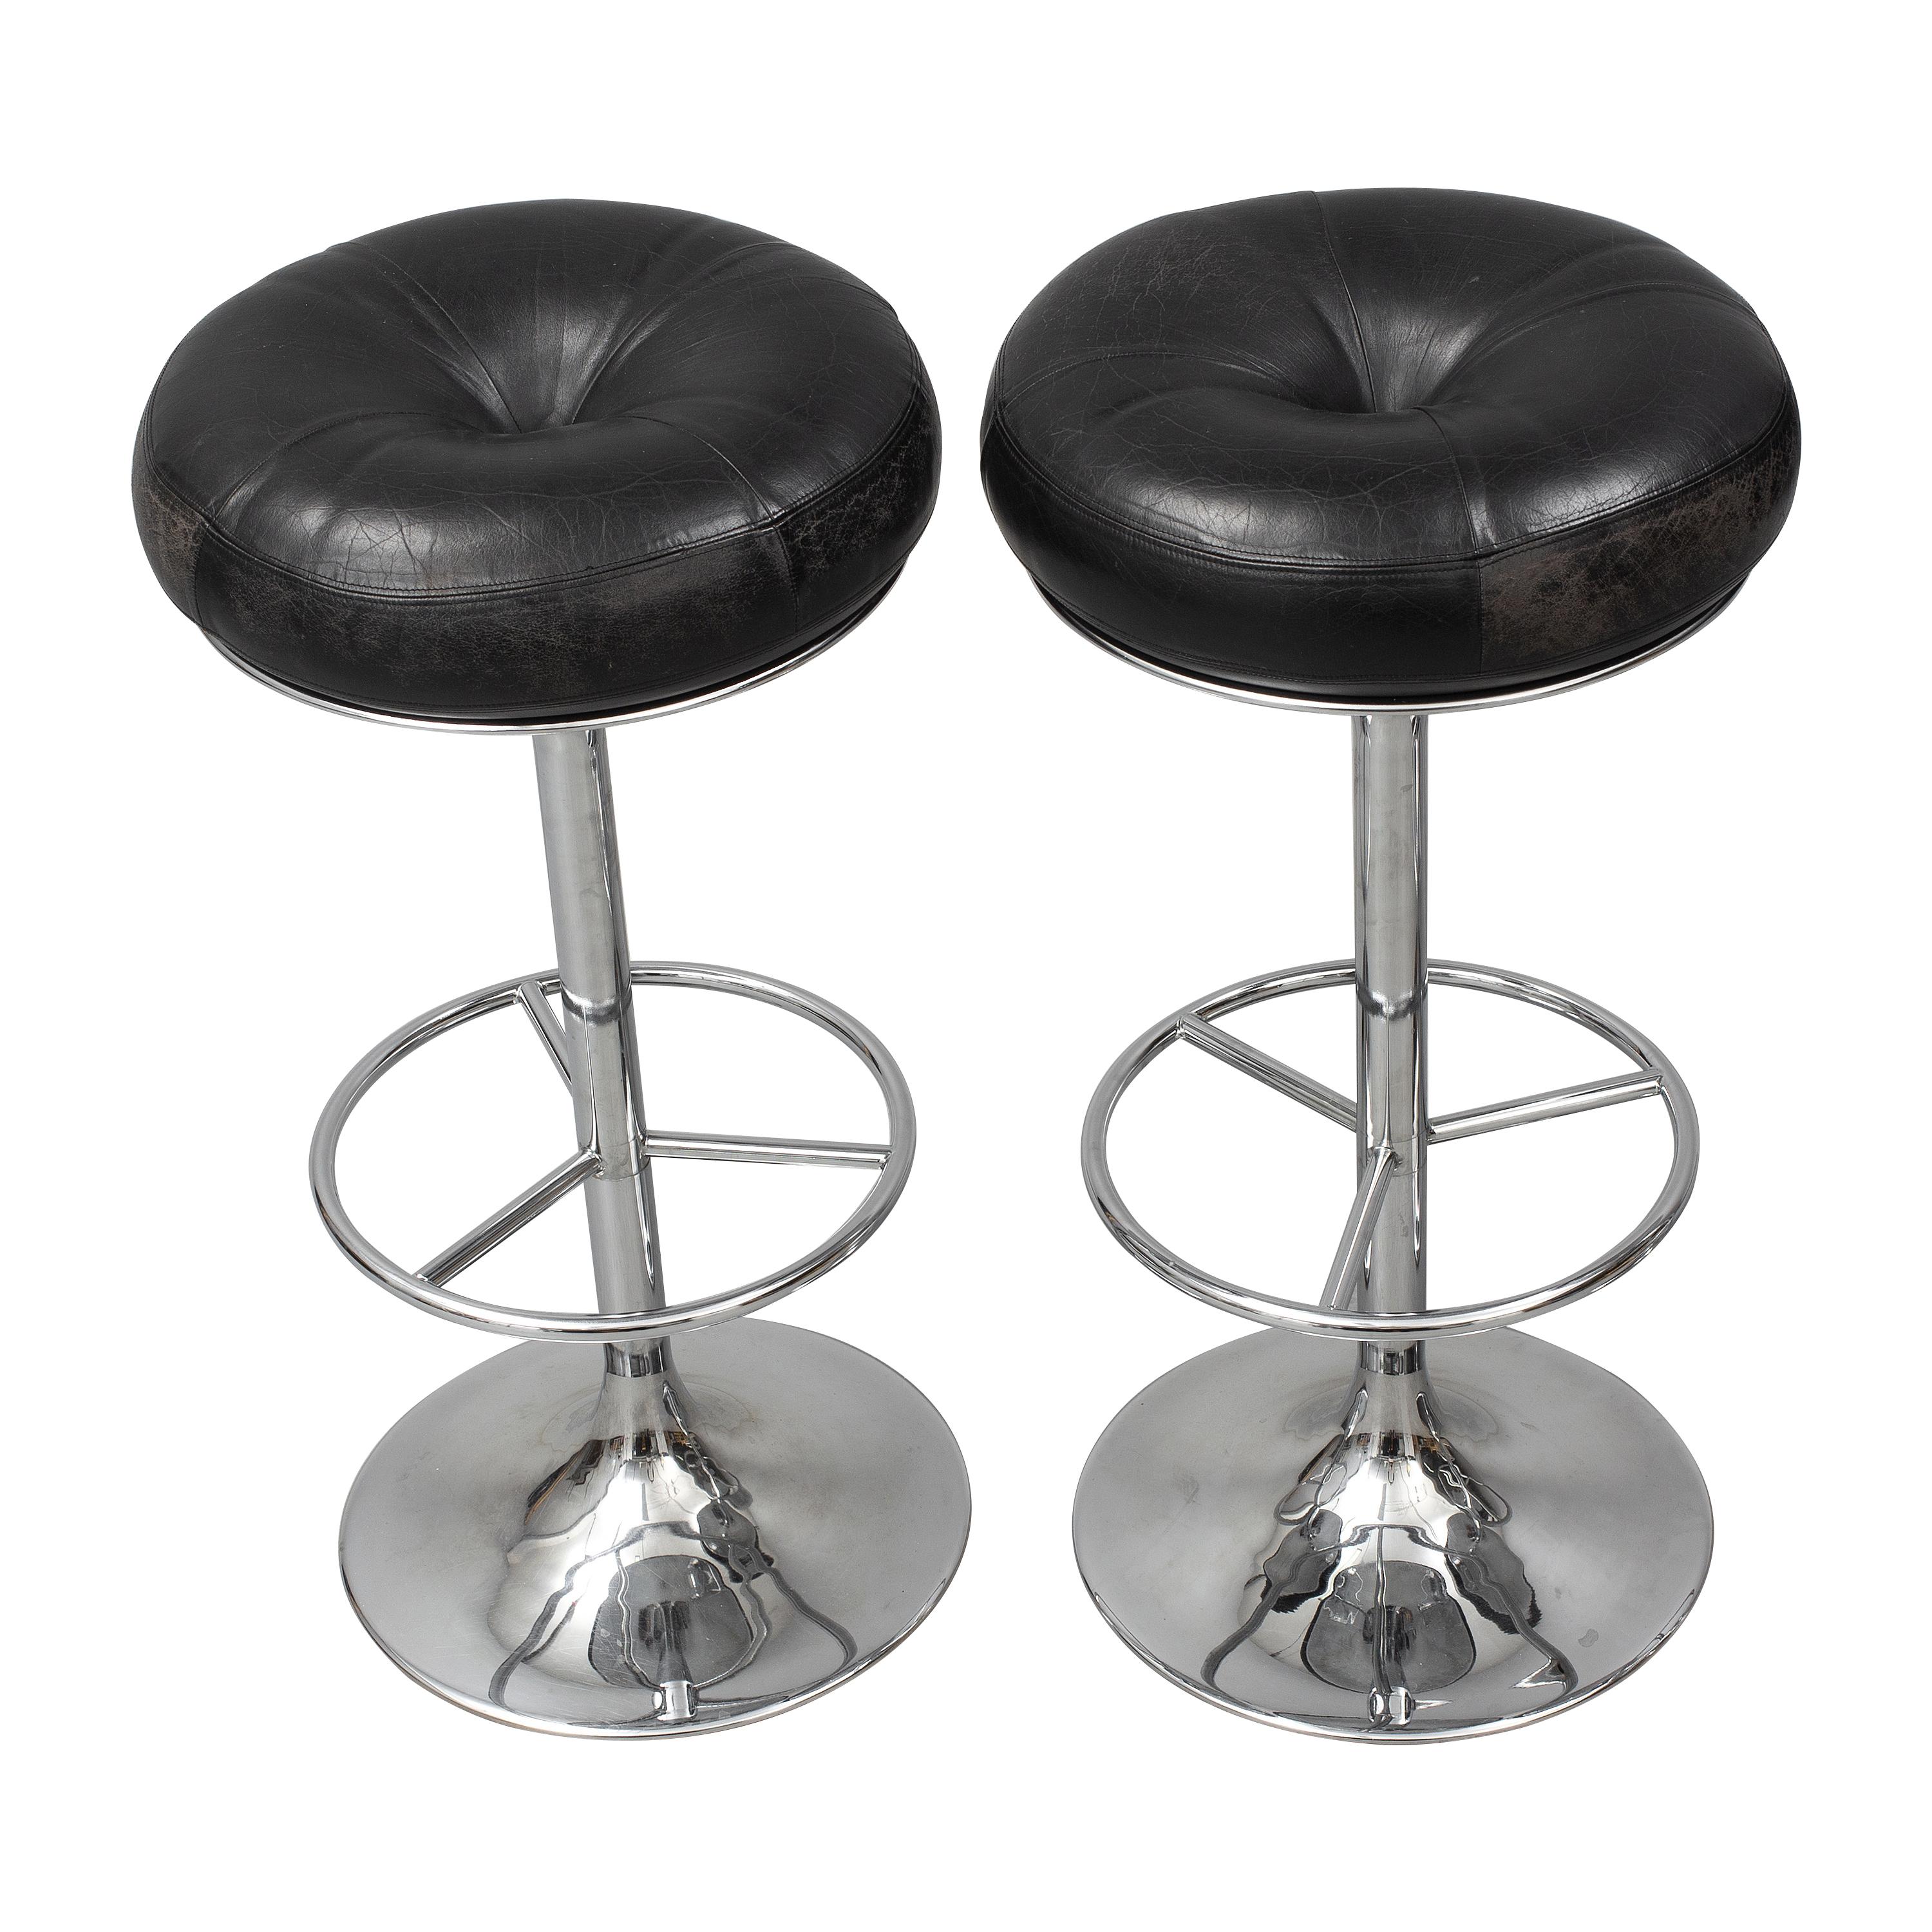 Set of 4 1970s Chrome and Black Leather Bar Stools by Johanson Design, Sweden 1